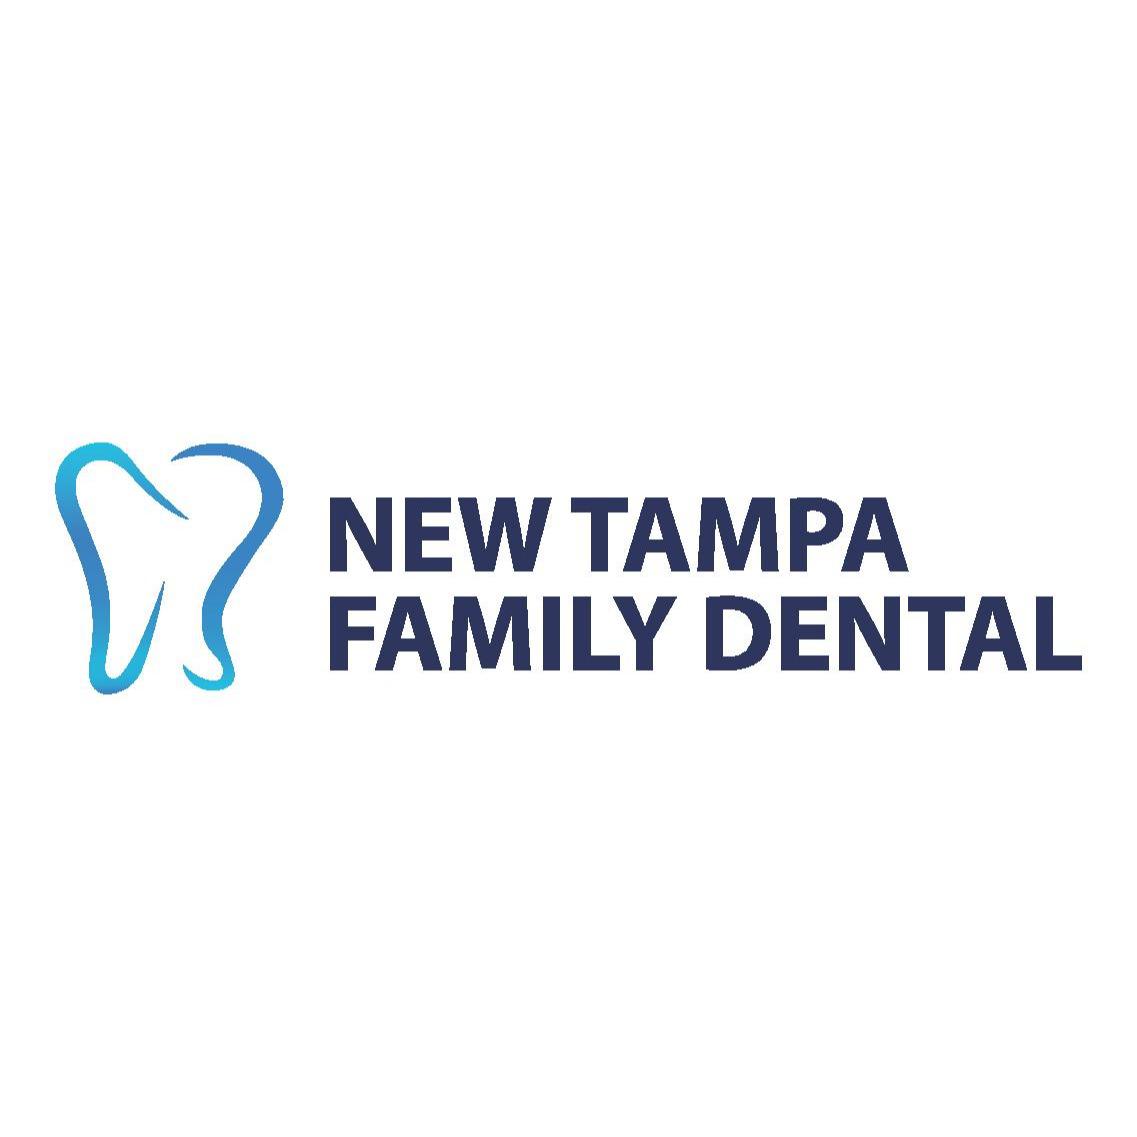 New Tampa Family Dental - Wesley Chapel, FL 33543 - (813)333-5277 | ShowMeLocal.com